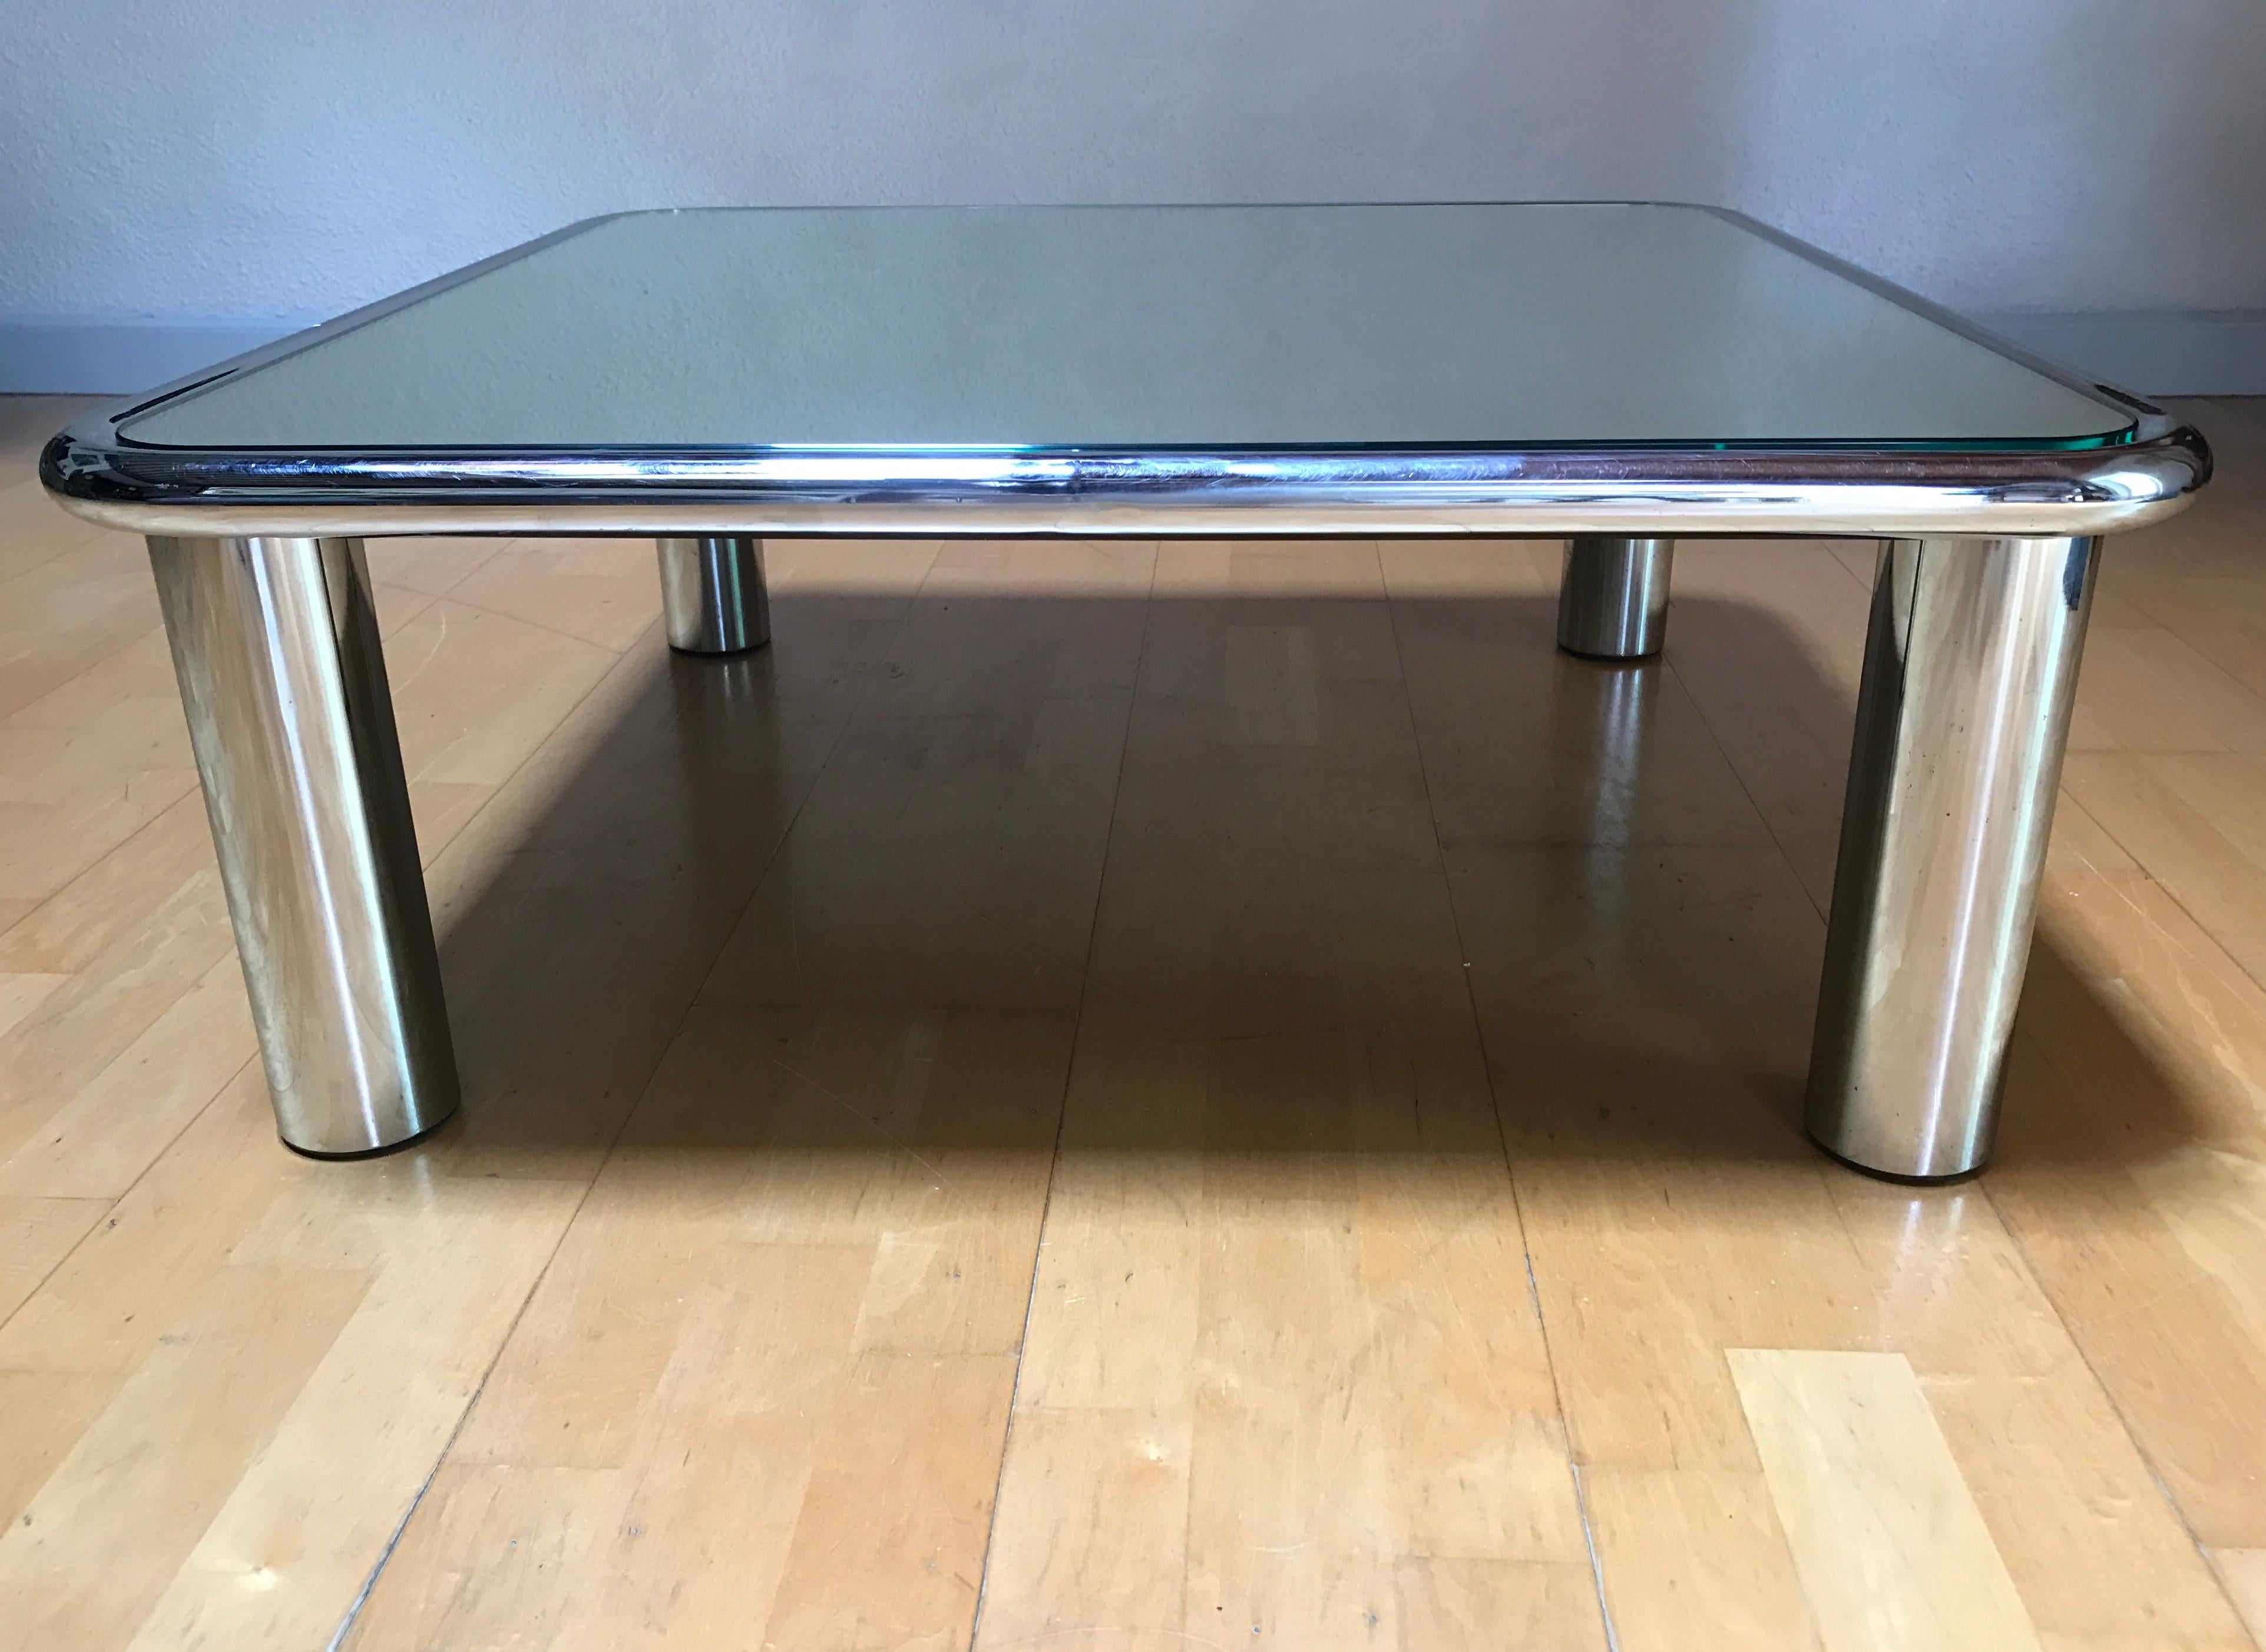 Mario Bellini
Mirror top chrome coffee table for Cassina Italy
Perfect condition
Measures: H 14.5 in. x W 35.25 in. x D 35.25 in.
H 36.83 cm x W 89.54 cm x D 89.54 cm.
 